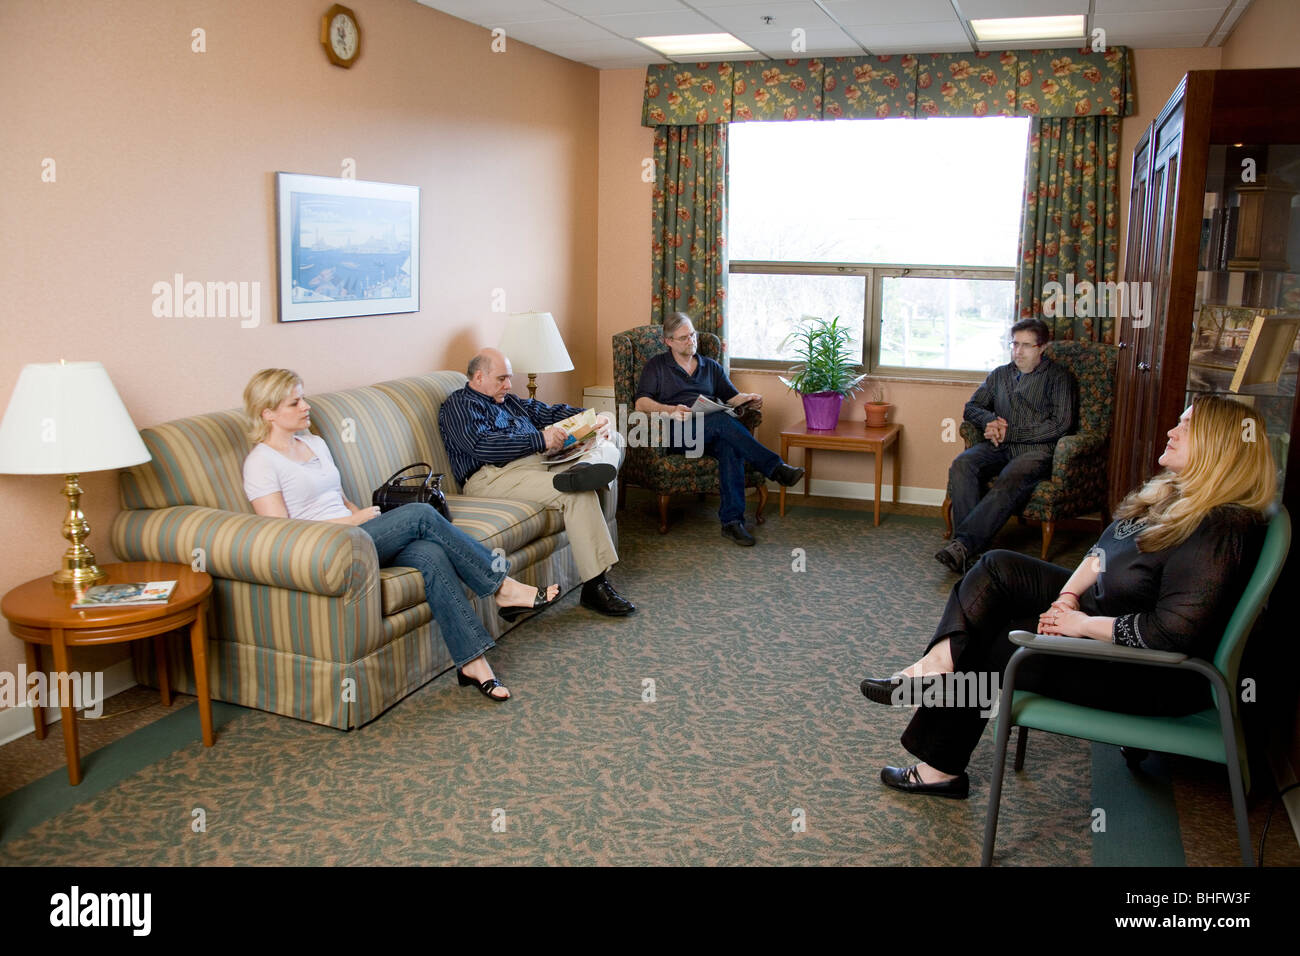 People waiting in holding area or waiting room at a hospital or nursing home. Stock Photo